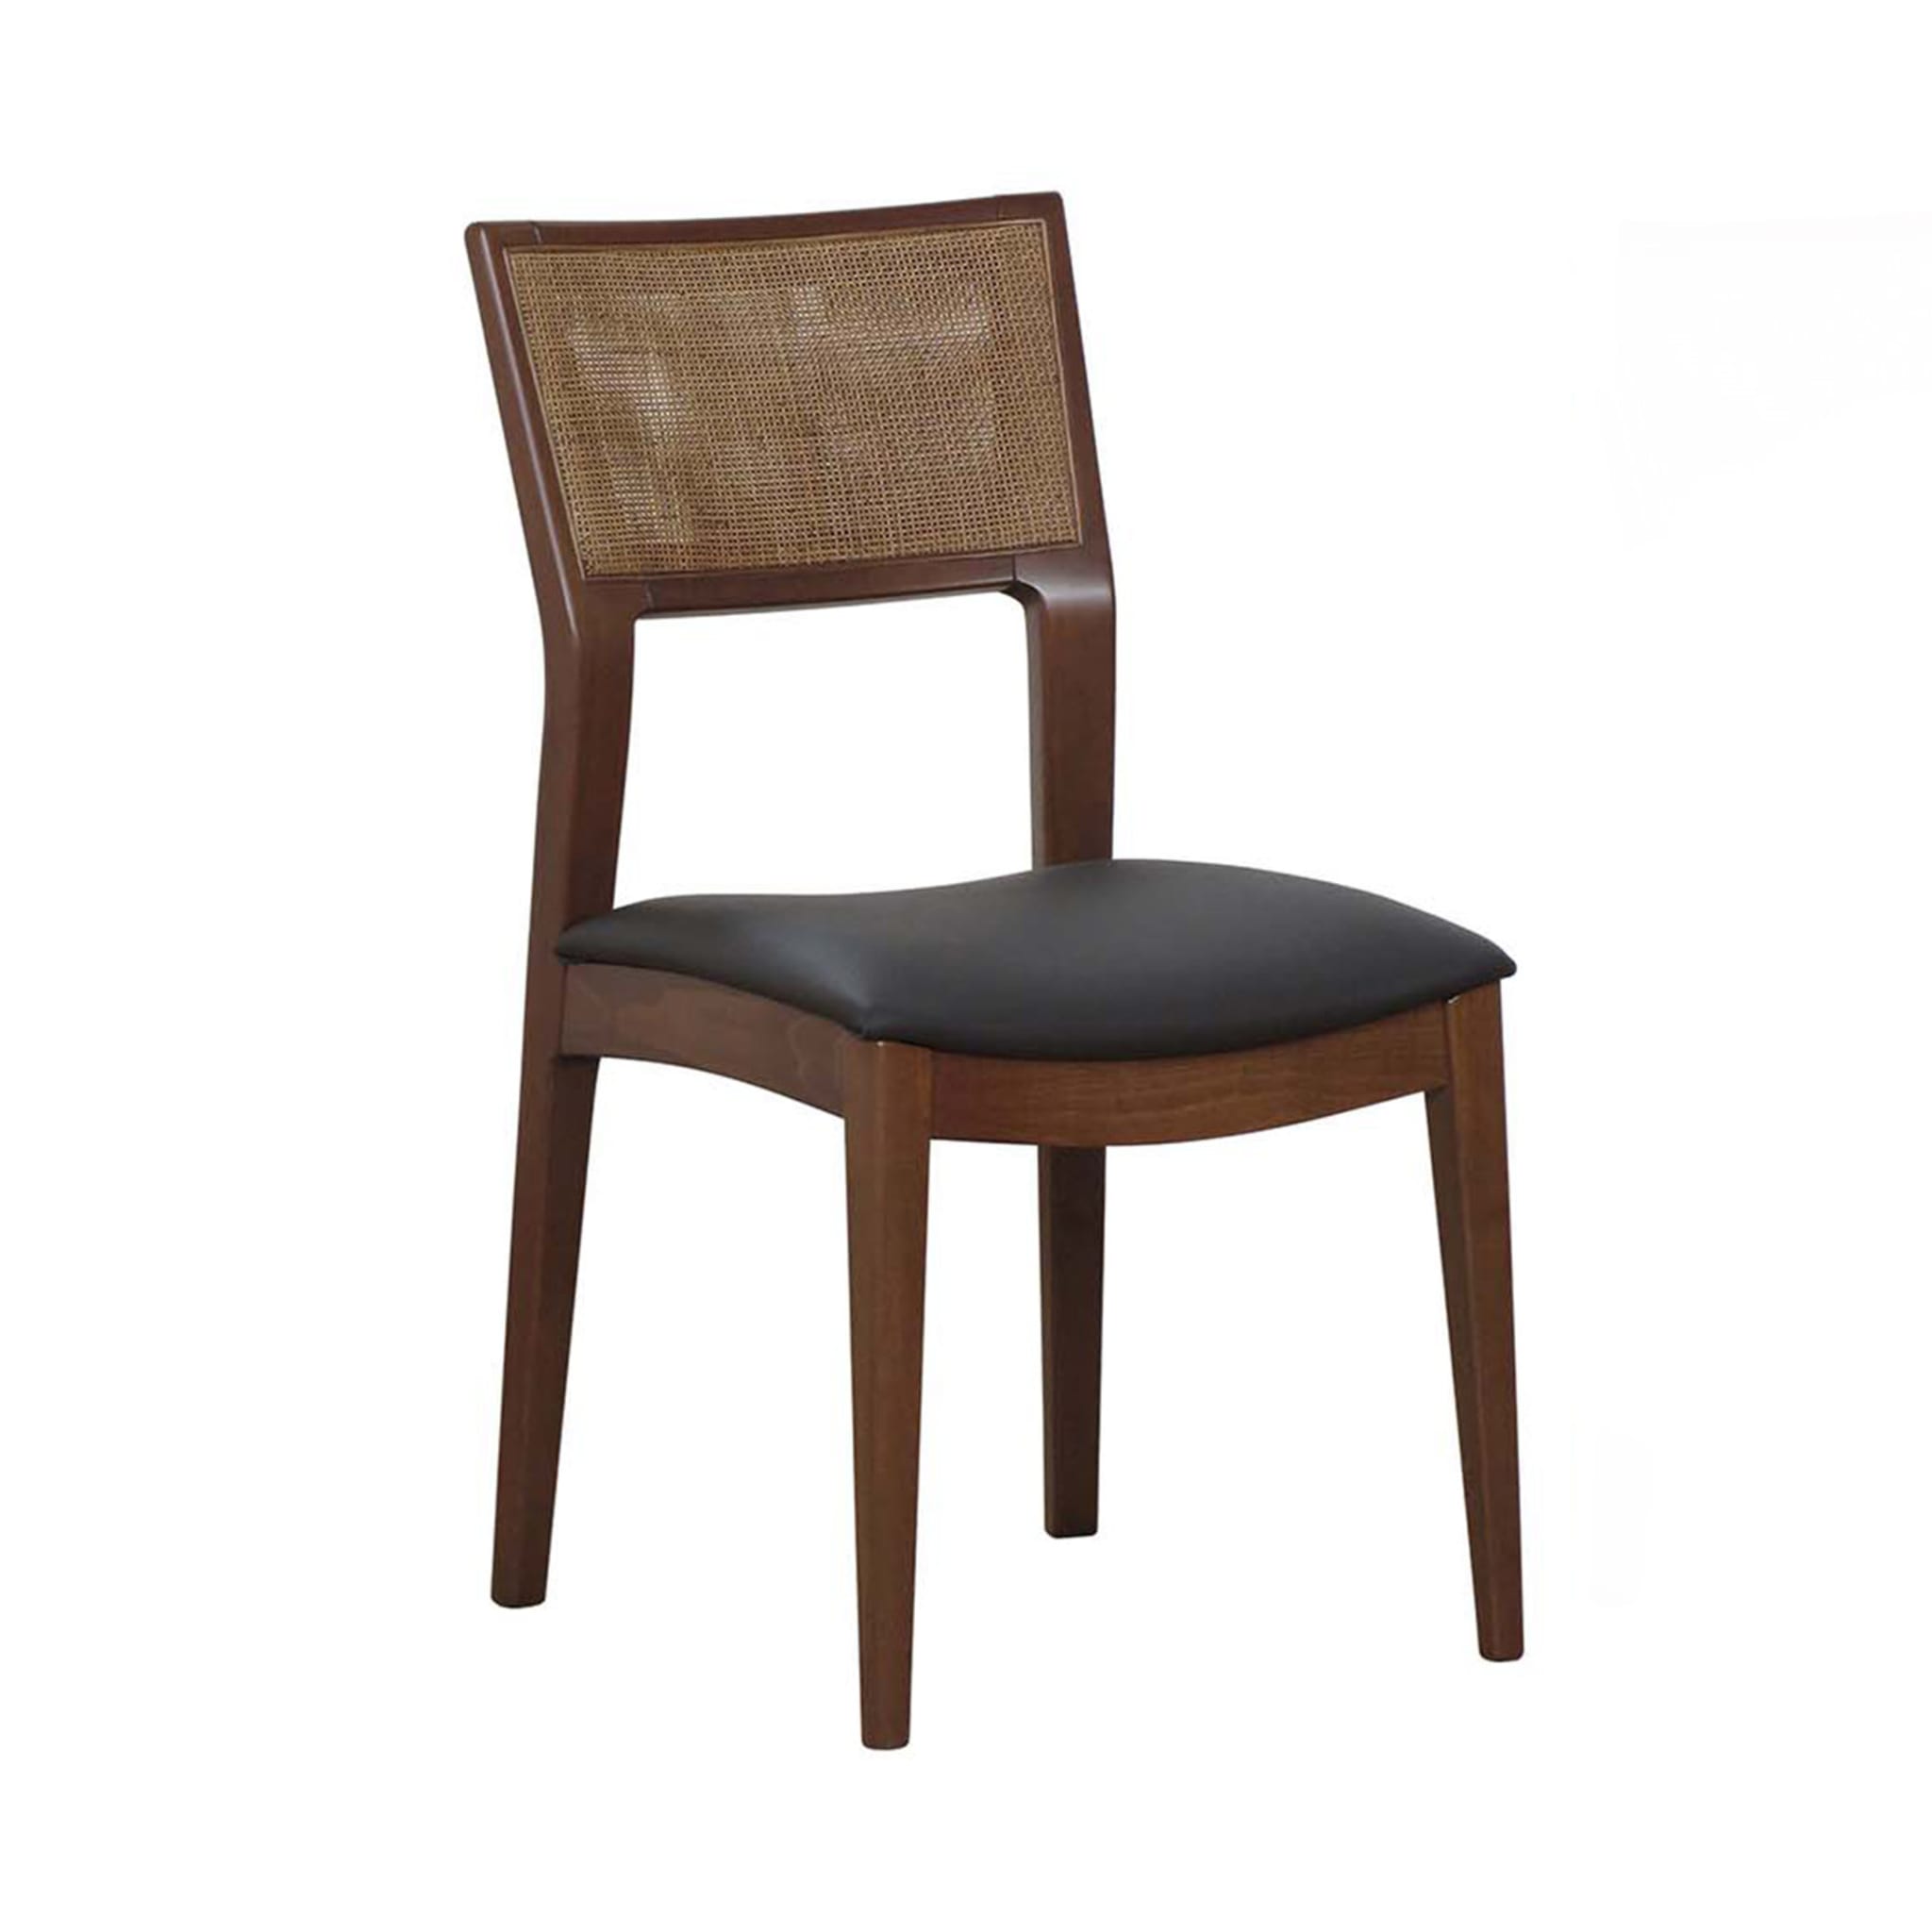 DOM-6 Set of 2 Chairs - Main view